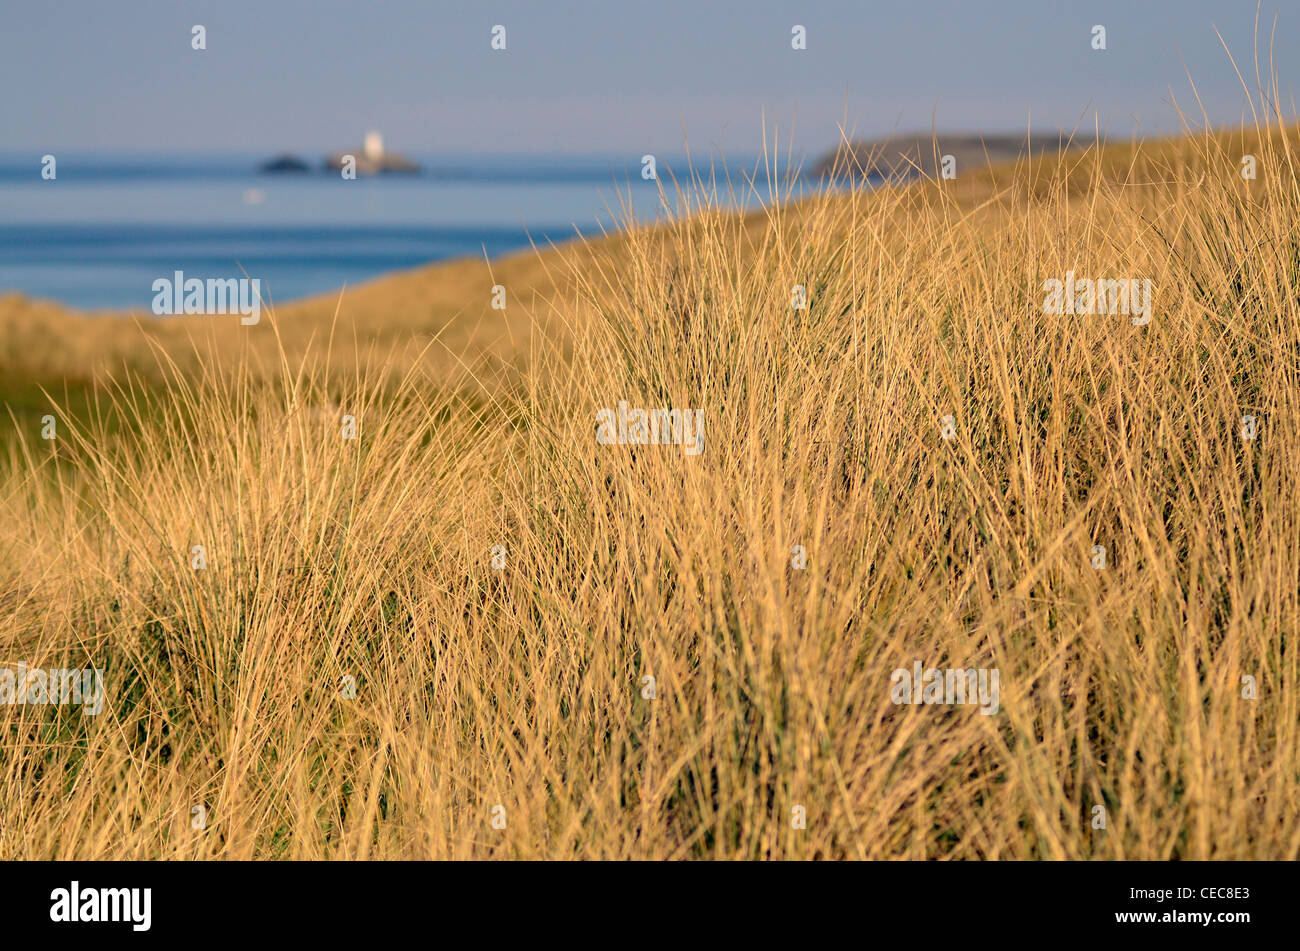 Sand dunes with lighthouse in background Stock Photo